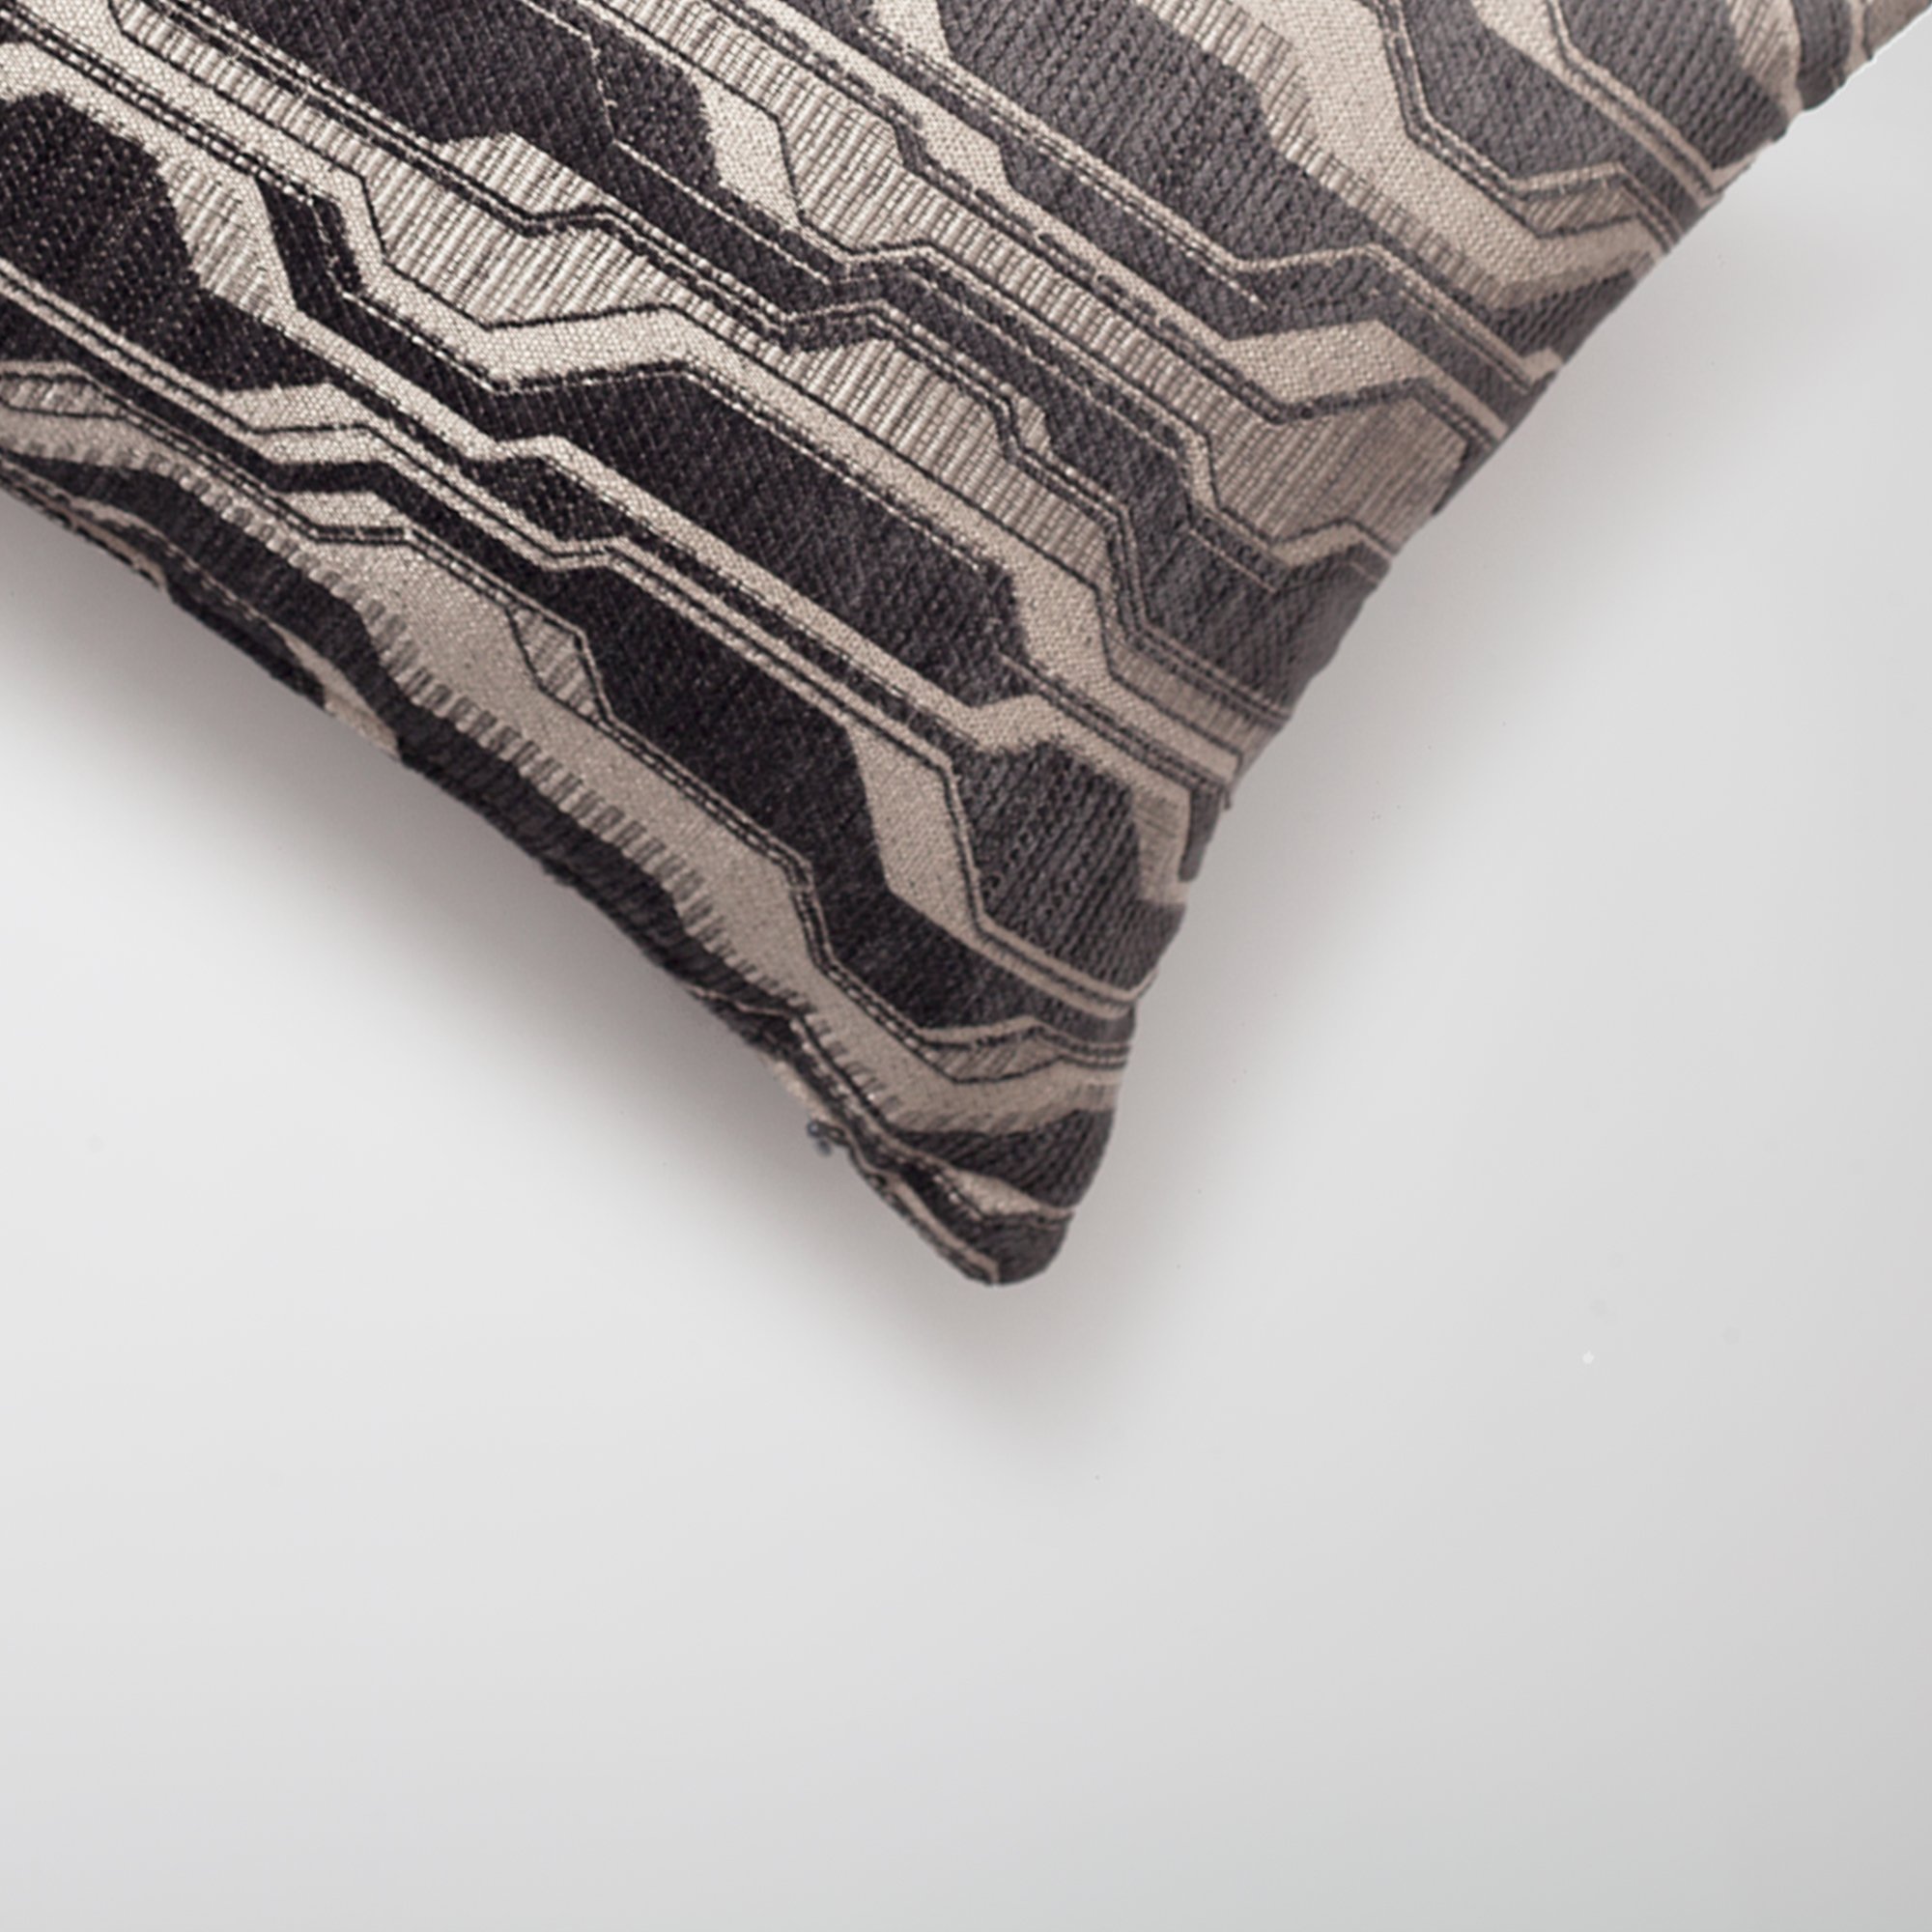 "Lebon" - Geometric Patterned 12x20 Inch Pillow - Anthracite (Cover Only)